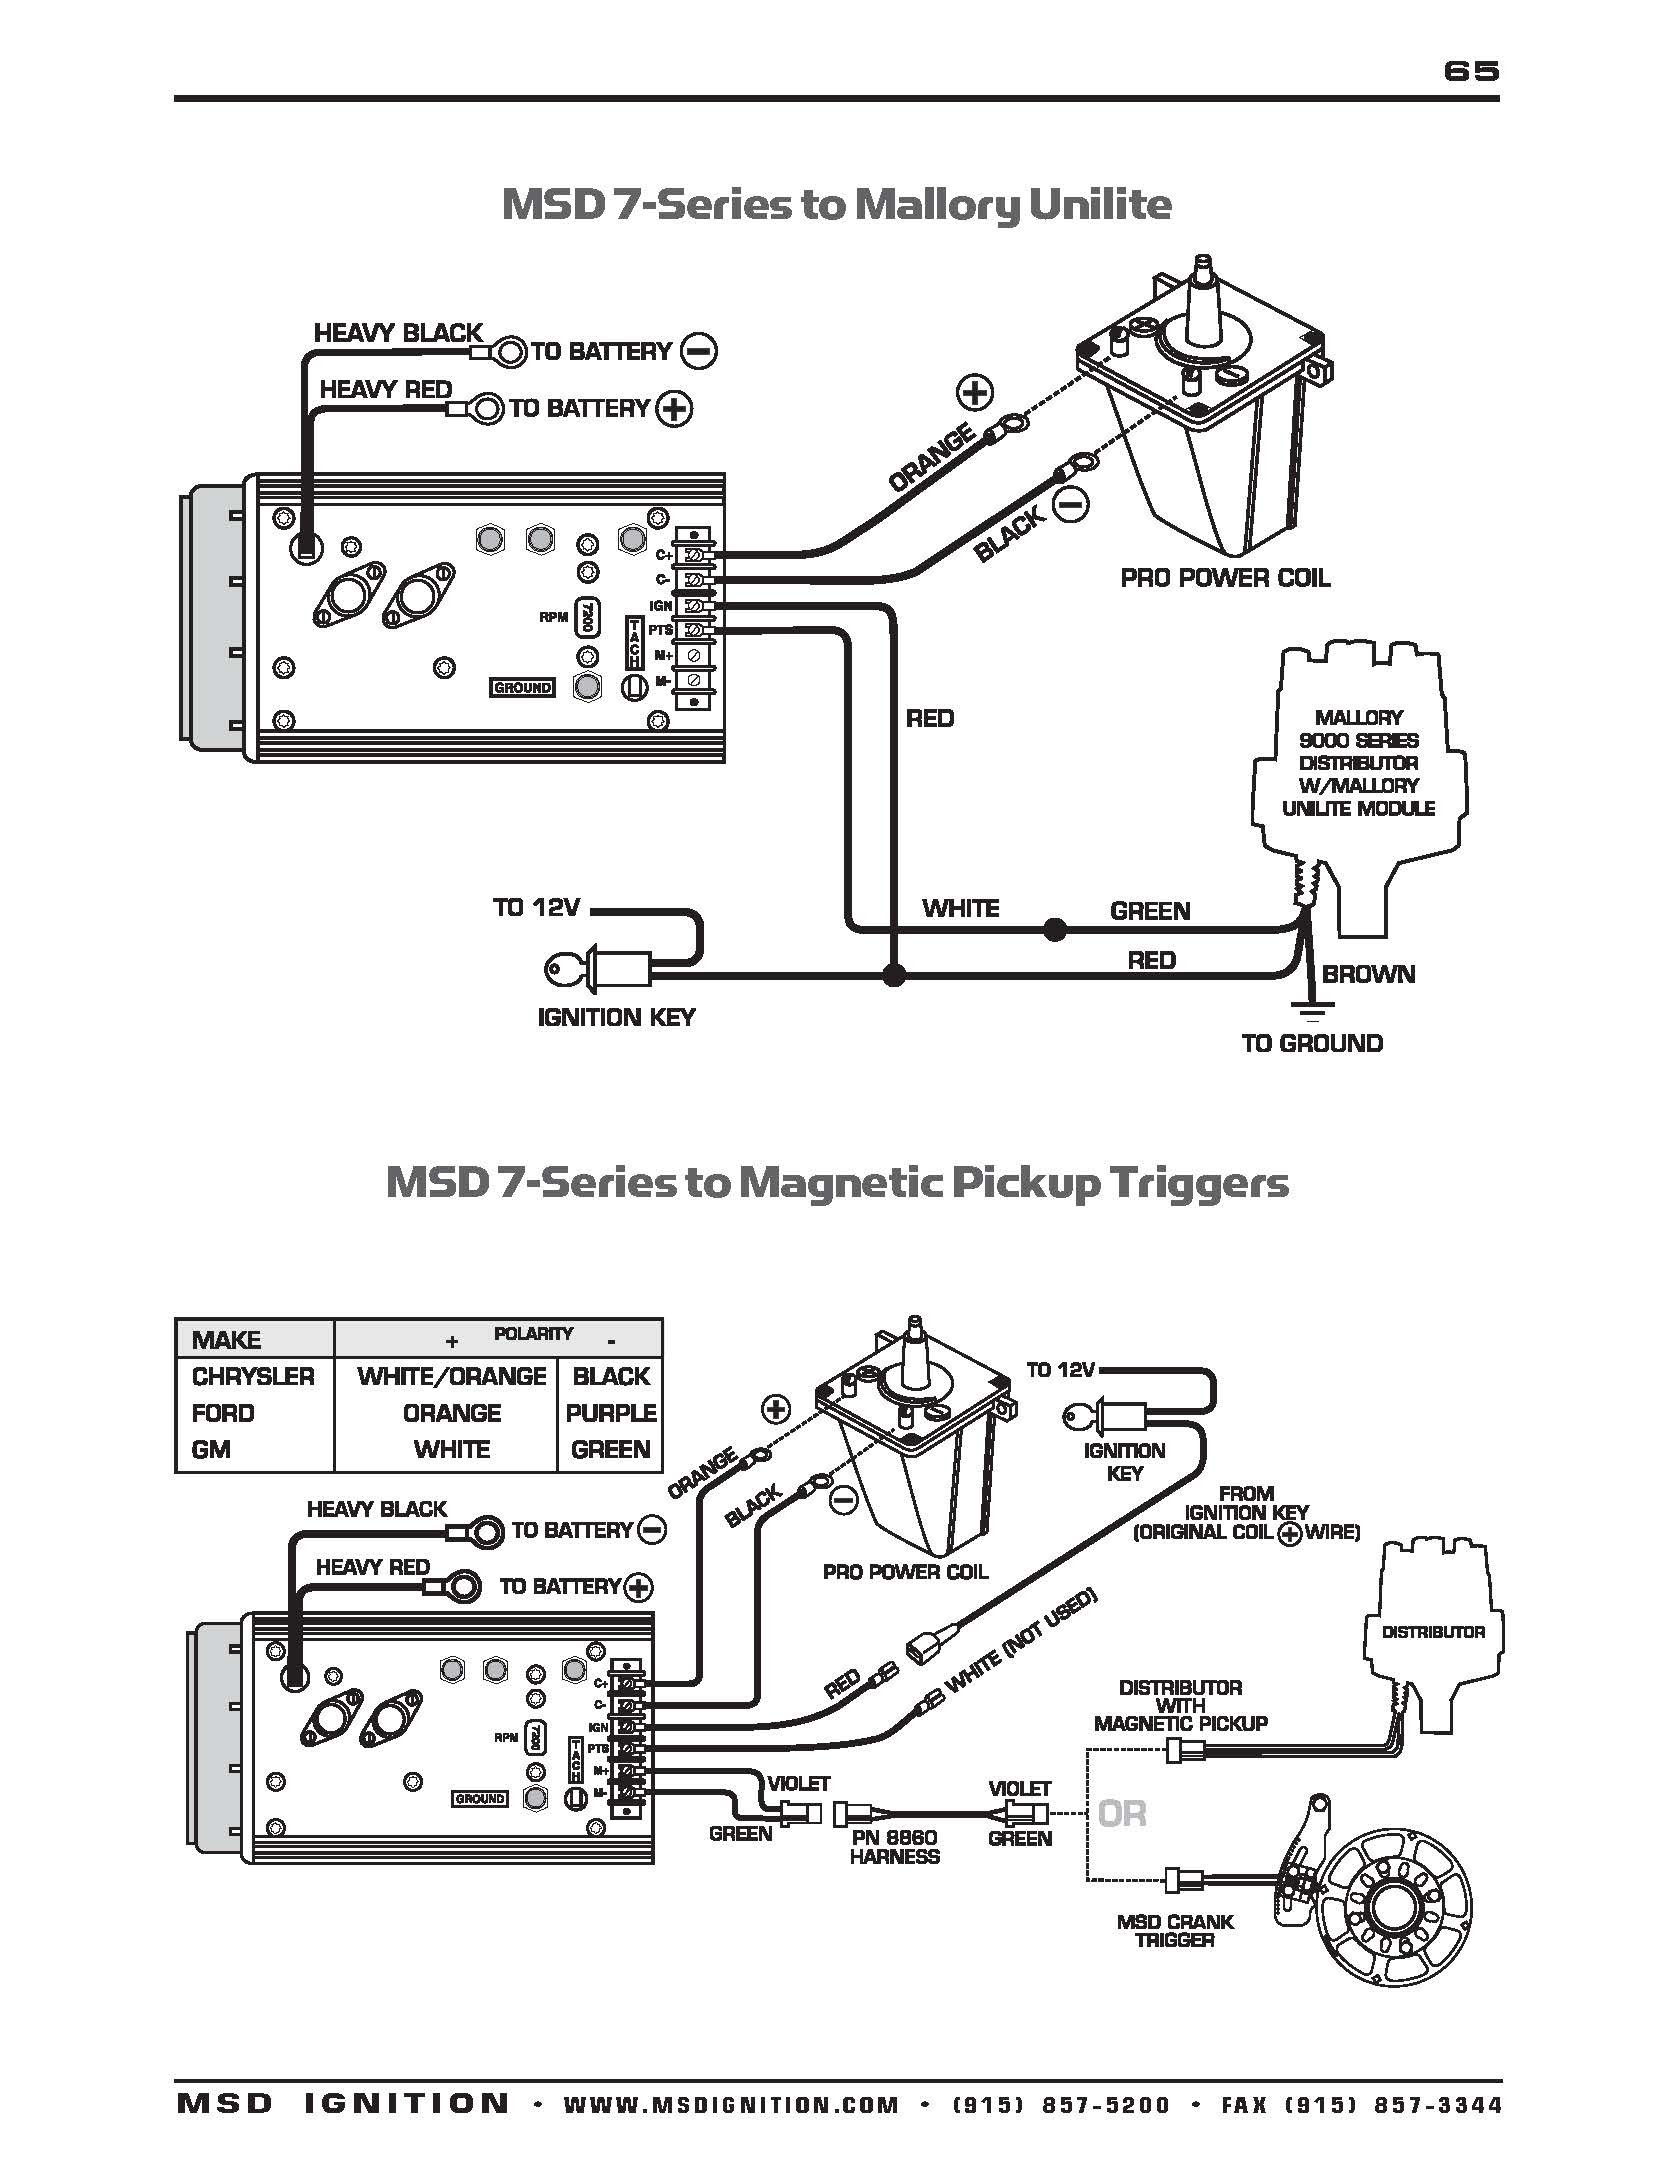 WDTN Pn9615 Page 064 In Msd Distributor Wiring Diagram